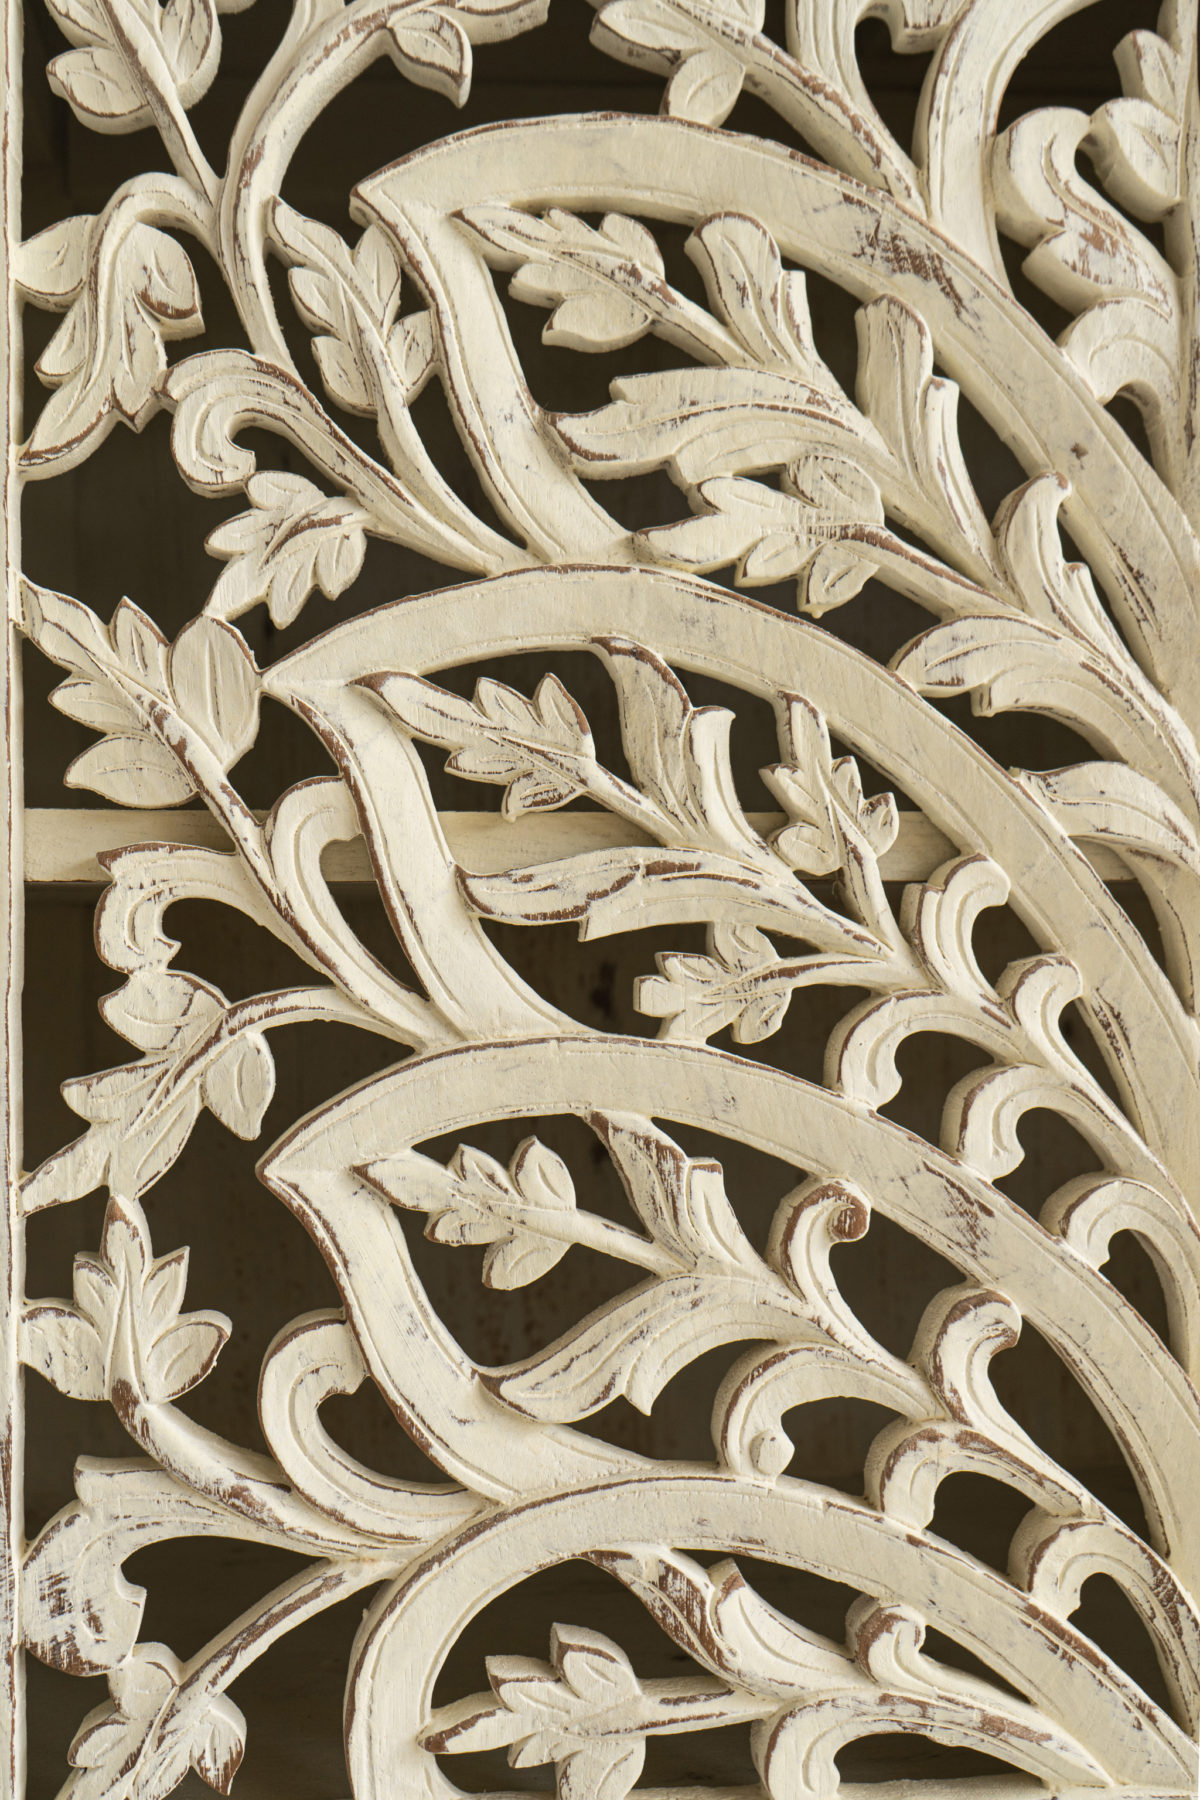 Cabinet art wood carving